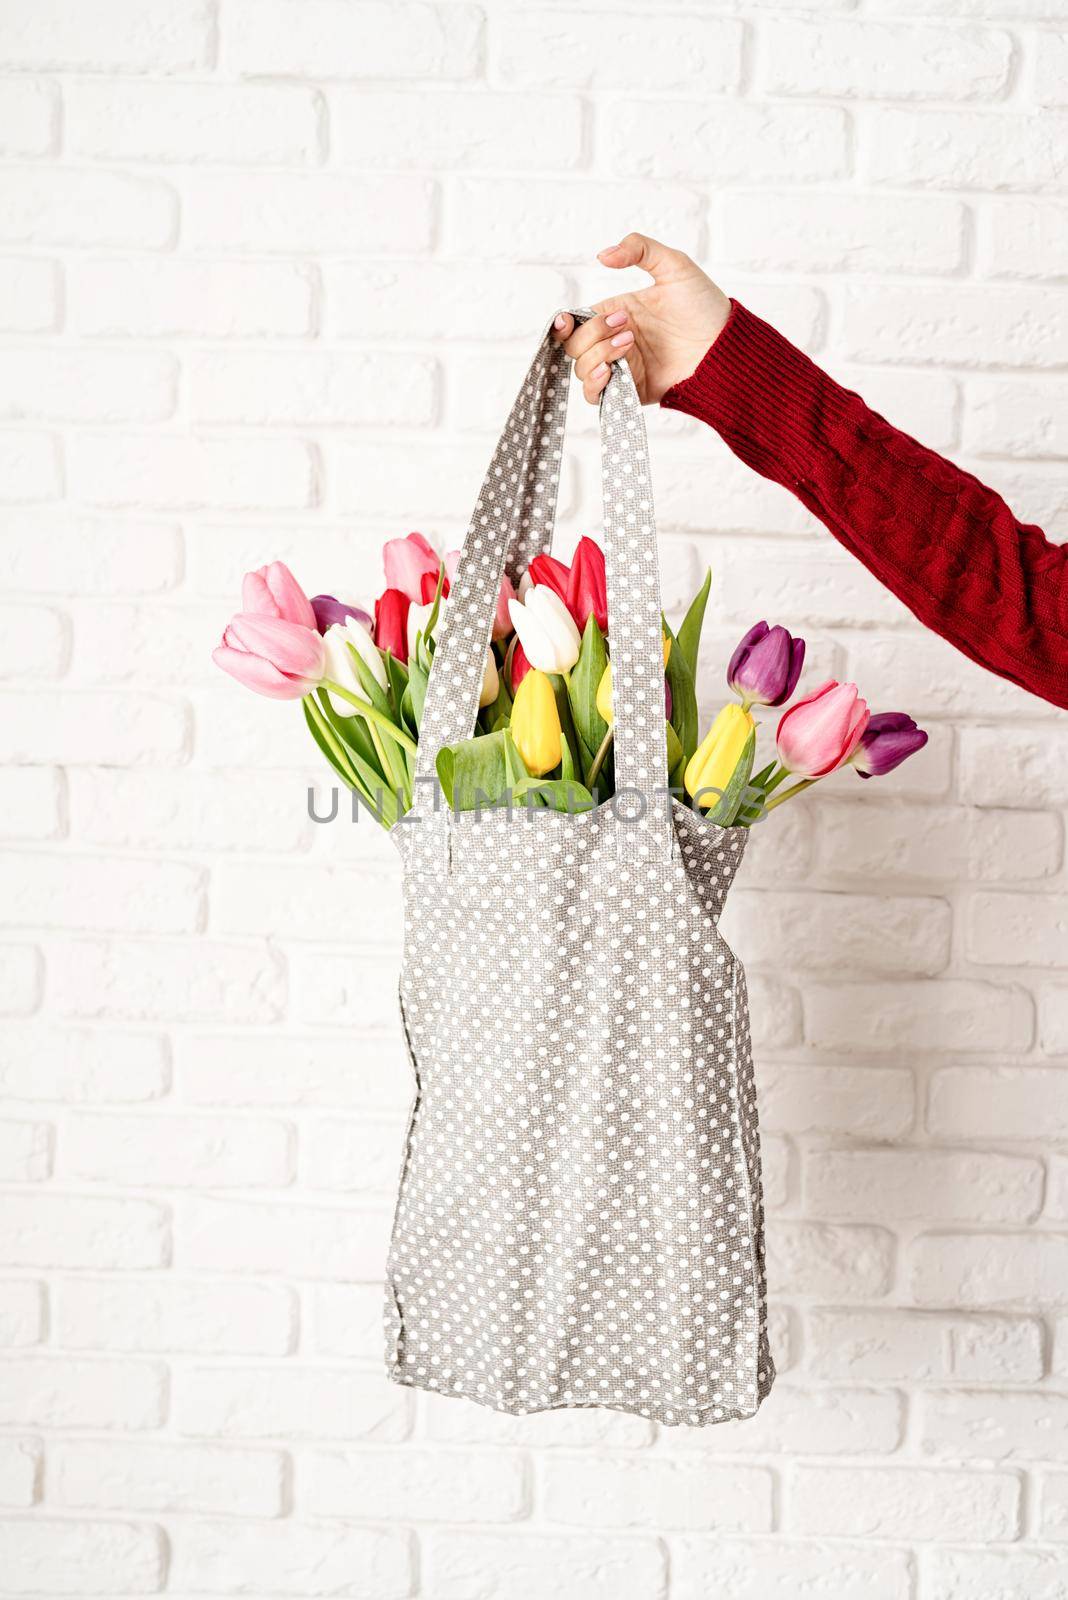 Woman hand holding gray polka dot fabric bag with colorful tulips by Desperada